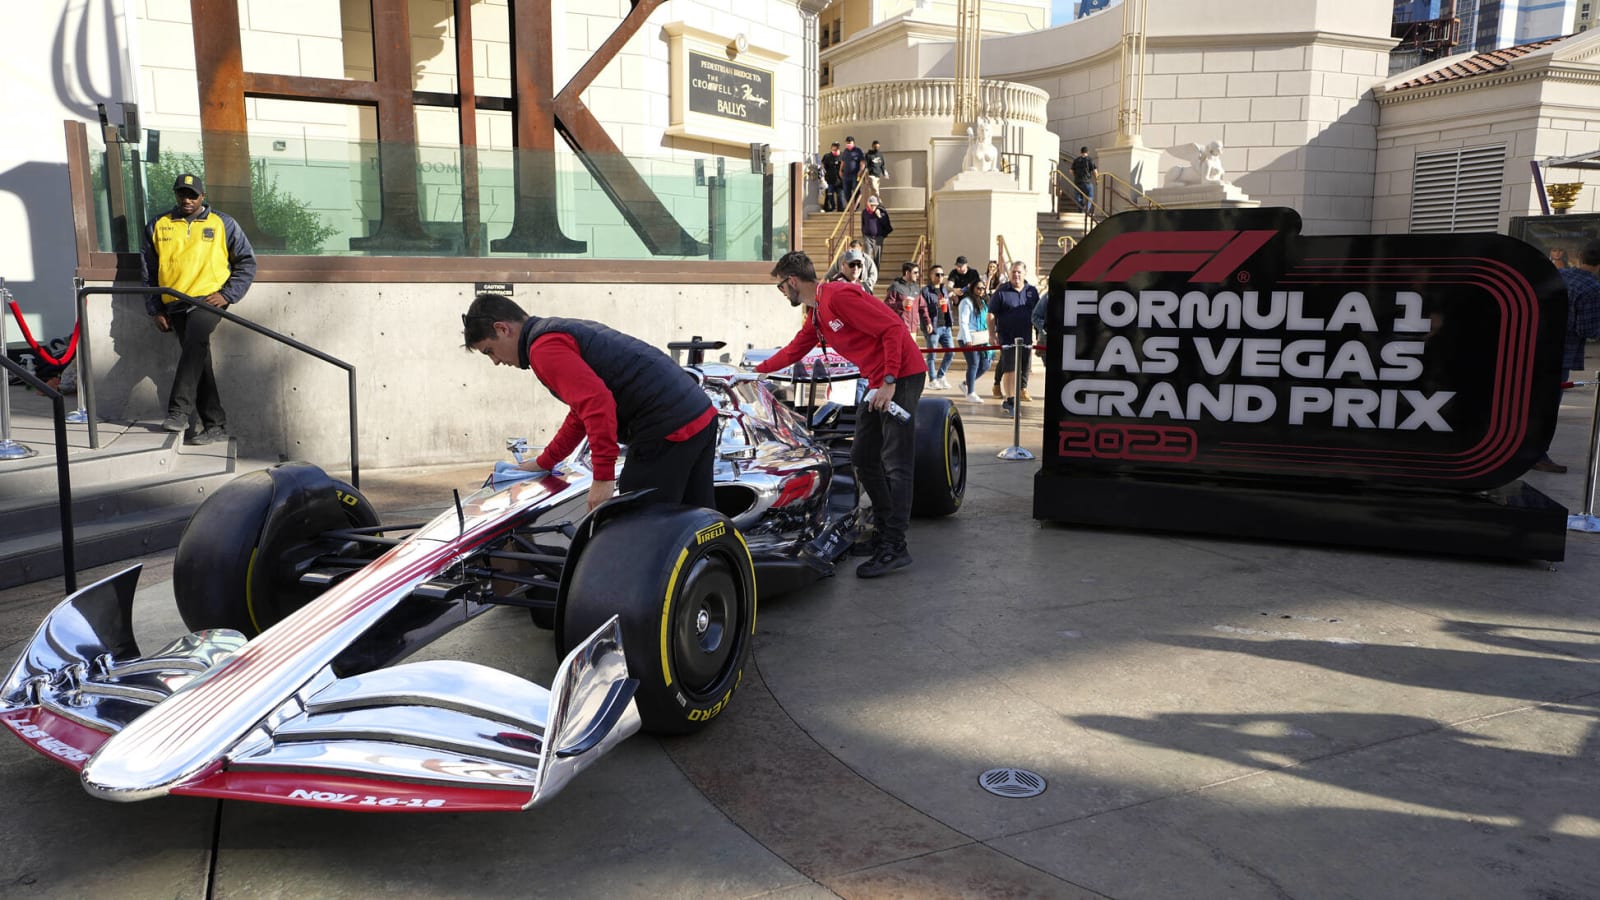 Vegas Grand Prix could cause chaos as coldest race in F1 history